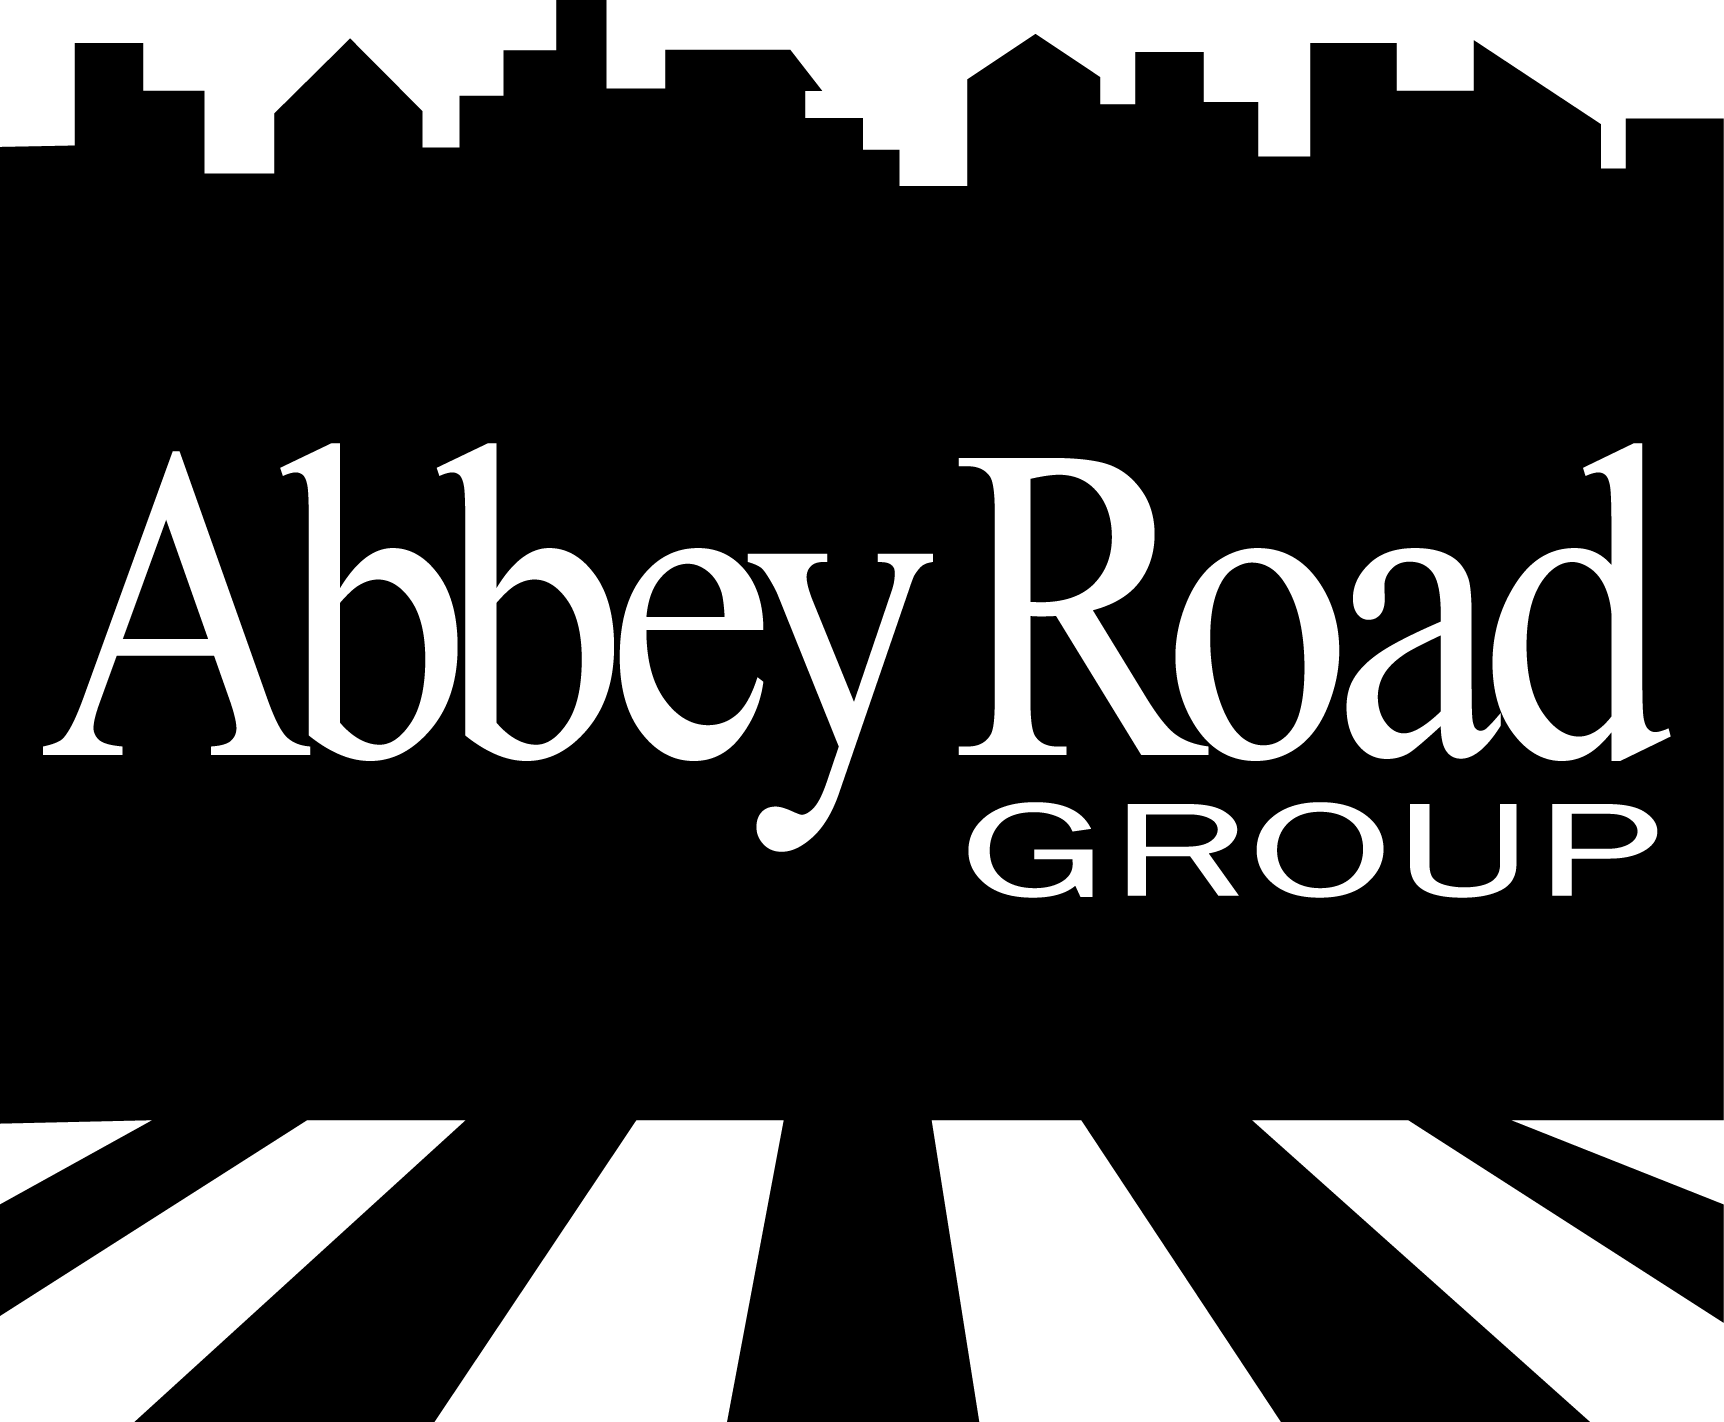 Abbey Road Group